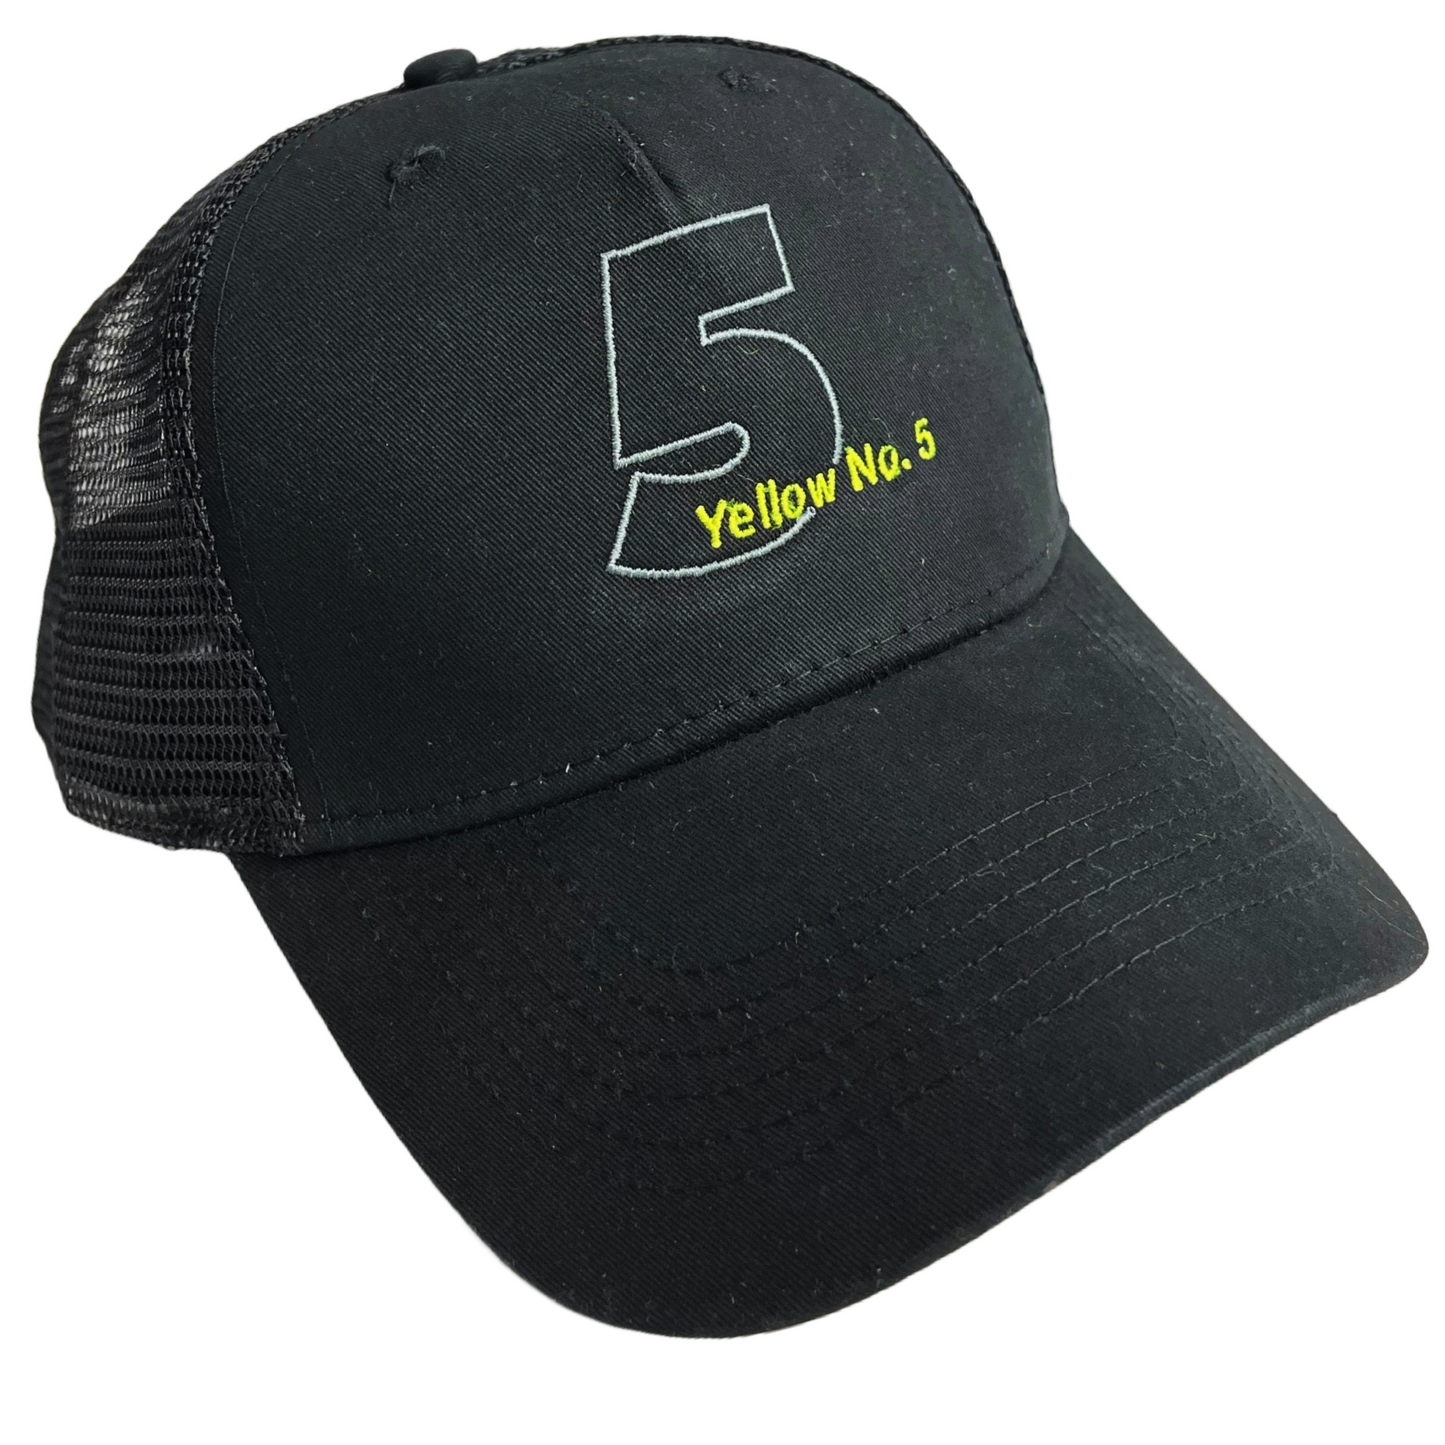 Yellow No. 5 Infield Trucker Mesh Snapback Cap Black/Slate and Black/Black One Size Fits Most